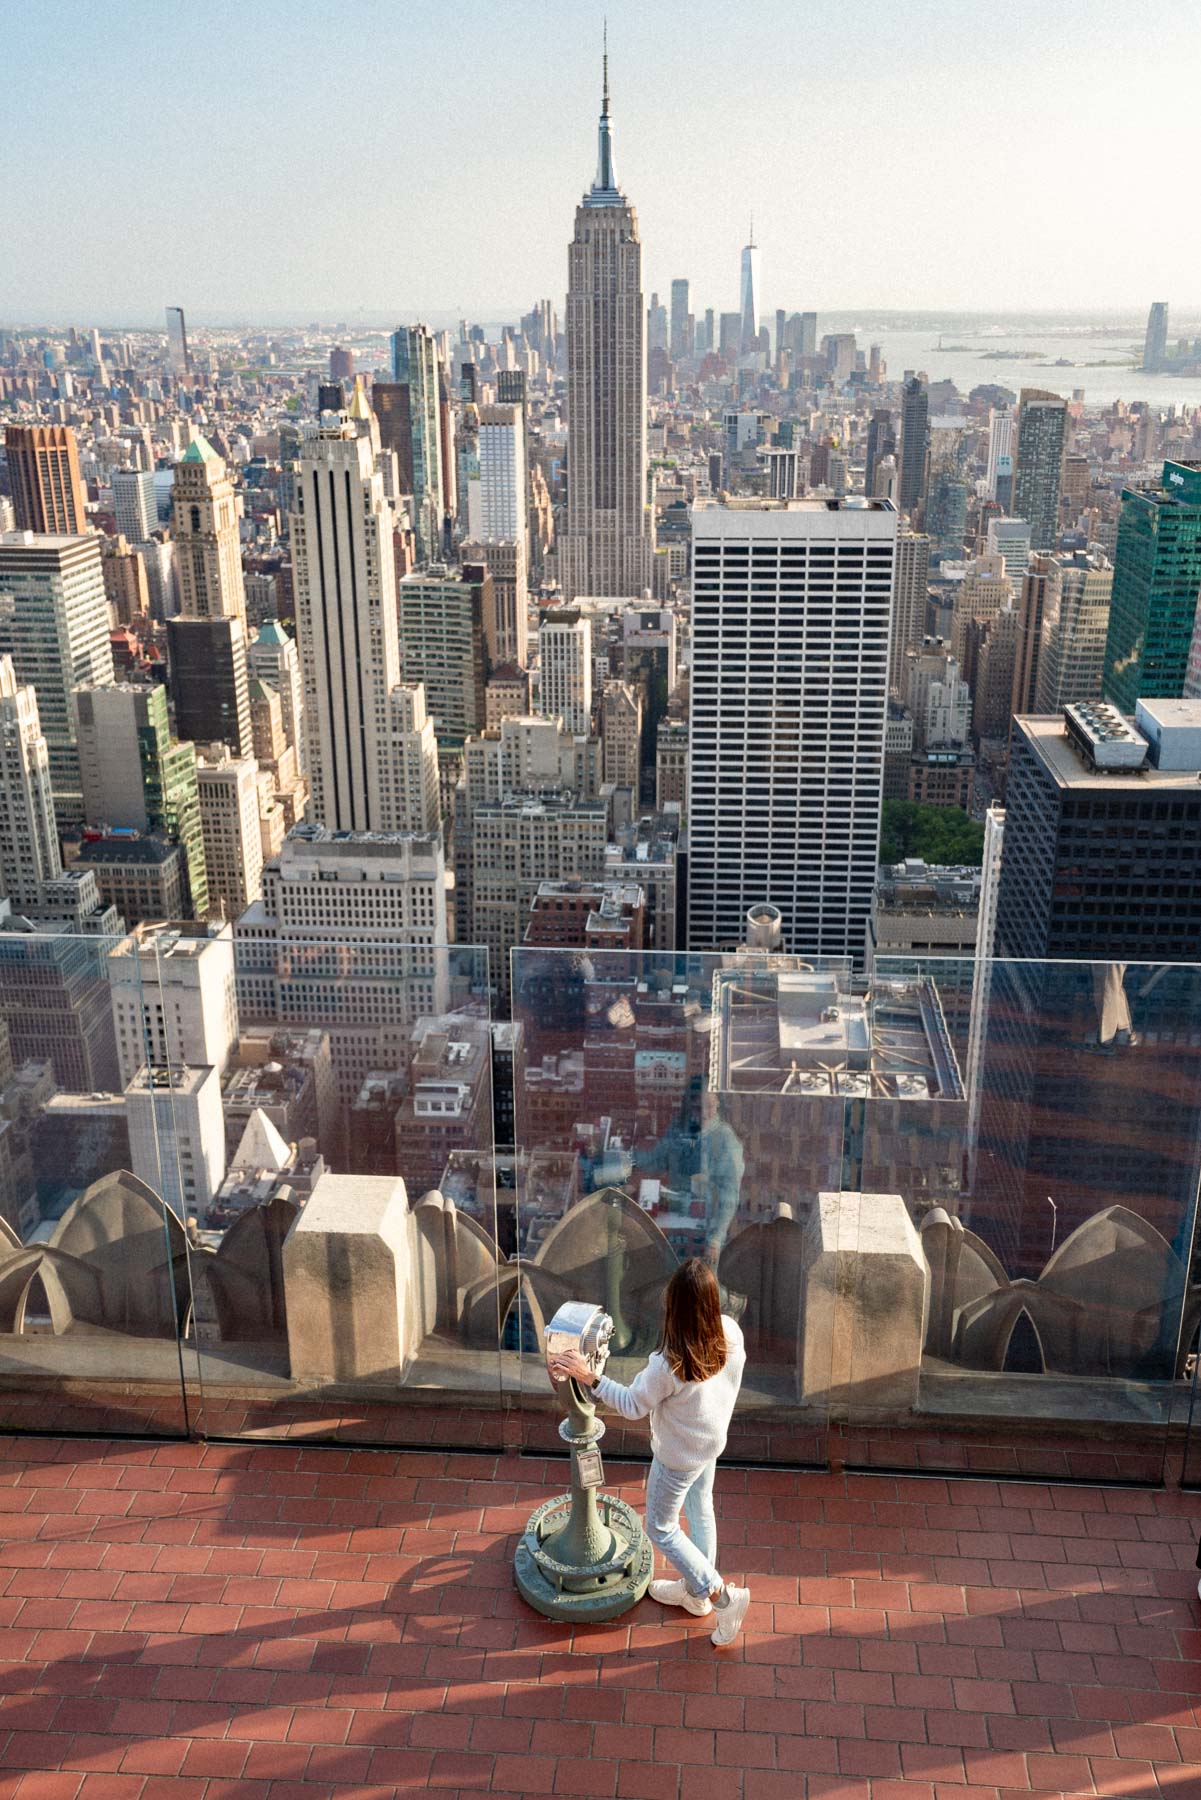 Empire State Building Views from Top of the Rock NYC, Best New York City Observation decks